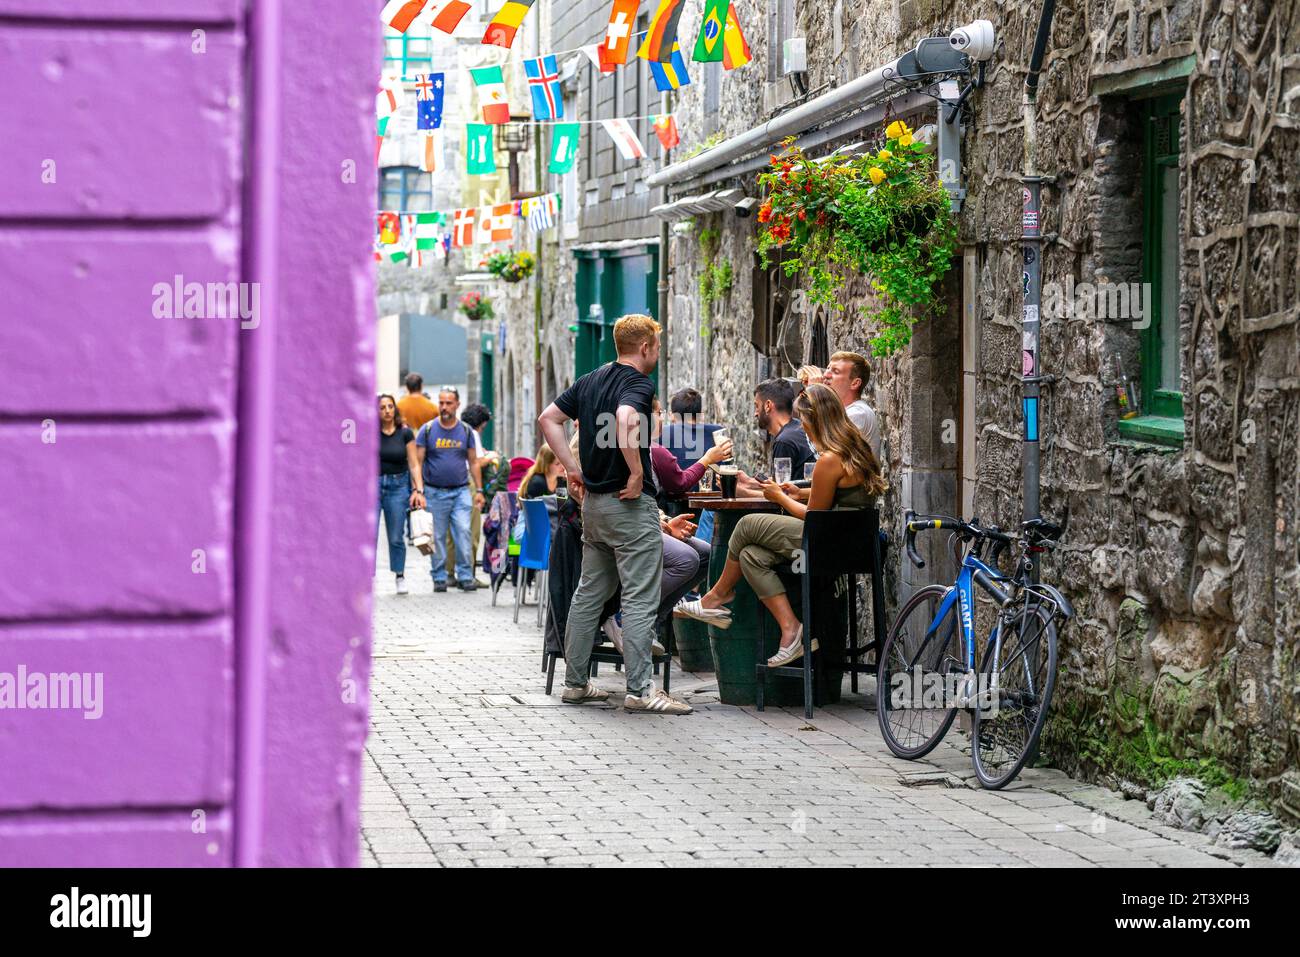 Quay Street Atmosphere, Galway, Irlande, Royaume-Uni. Banque D'Images